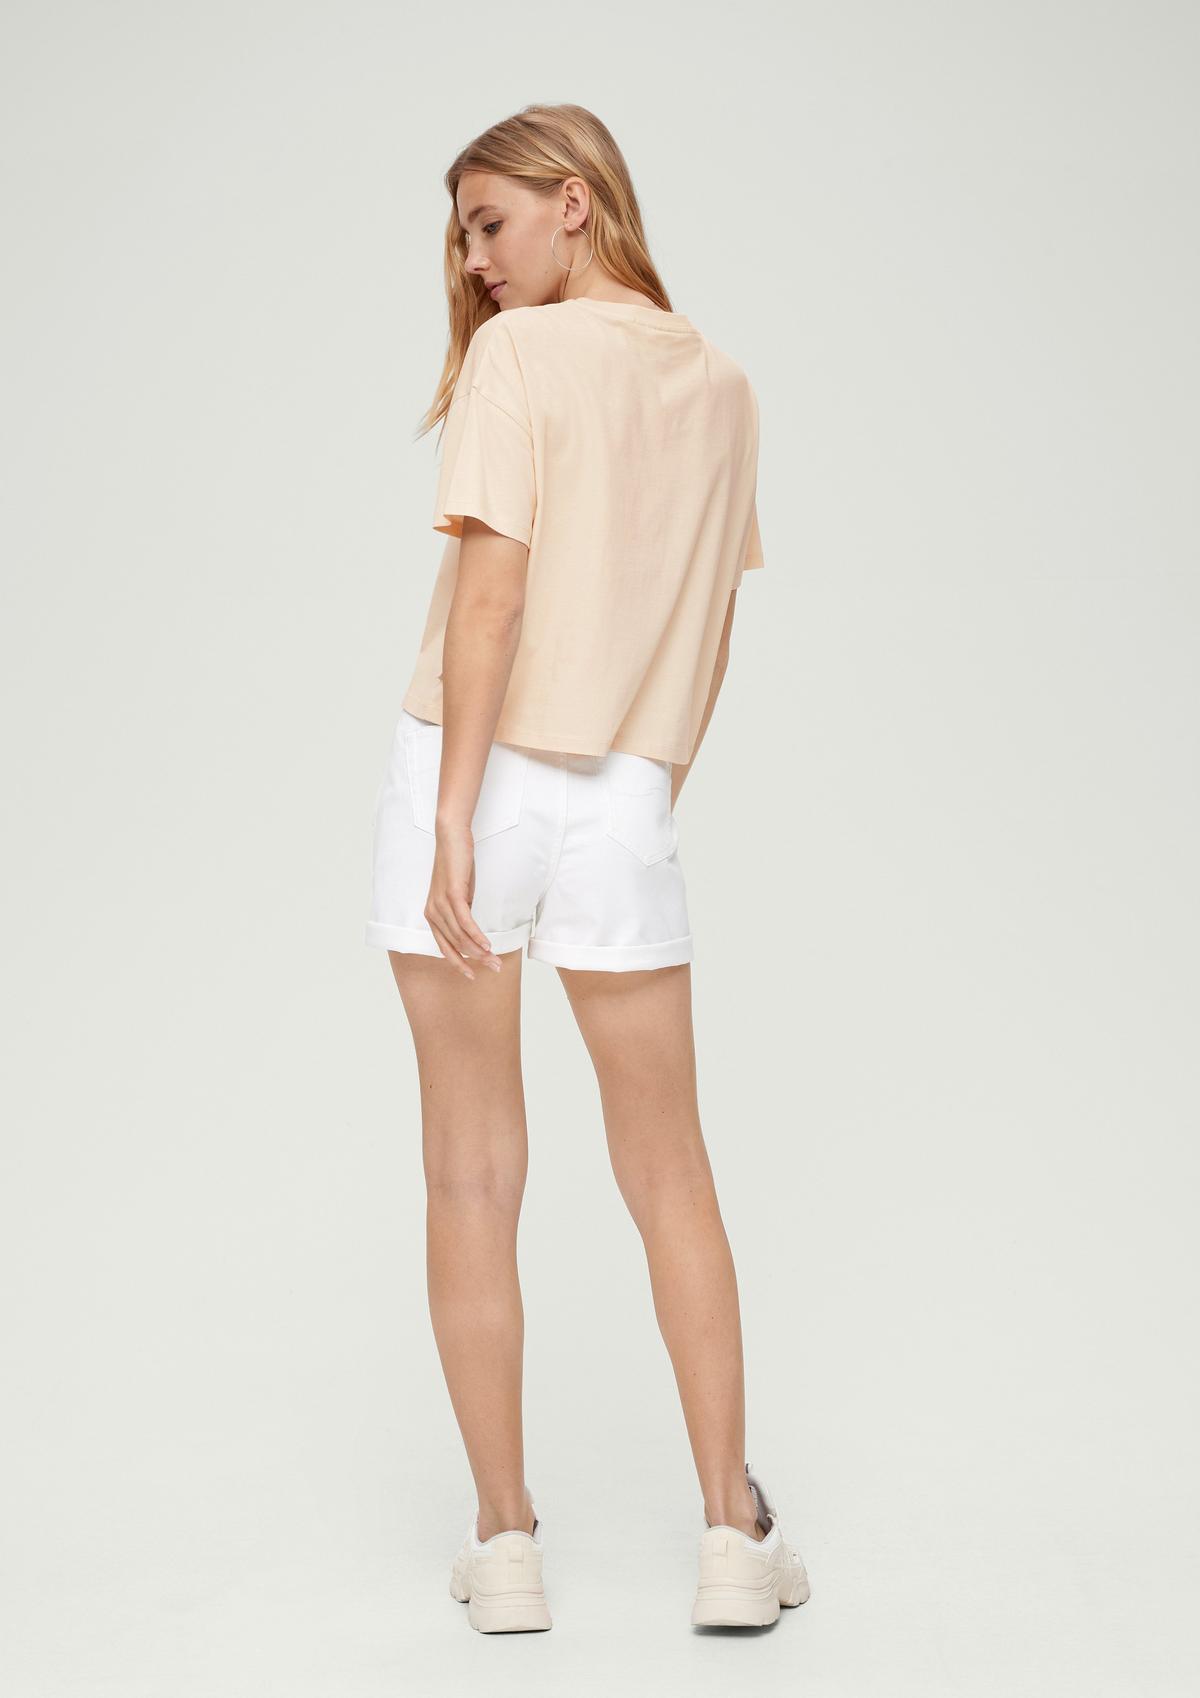 Cotton T-shirt with a front print - light beige